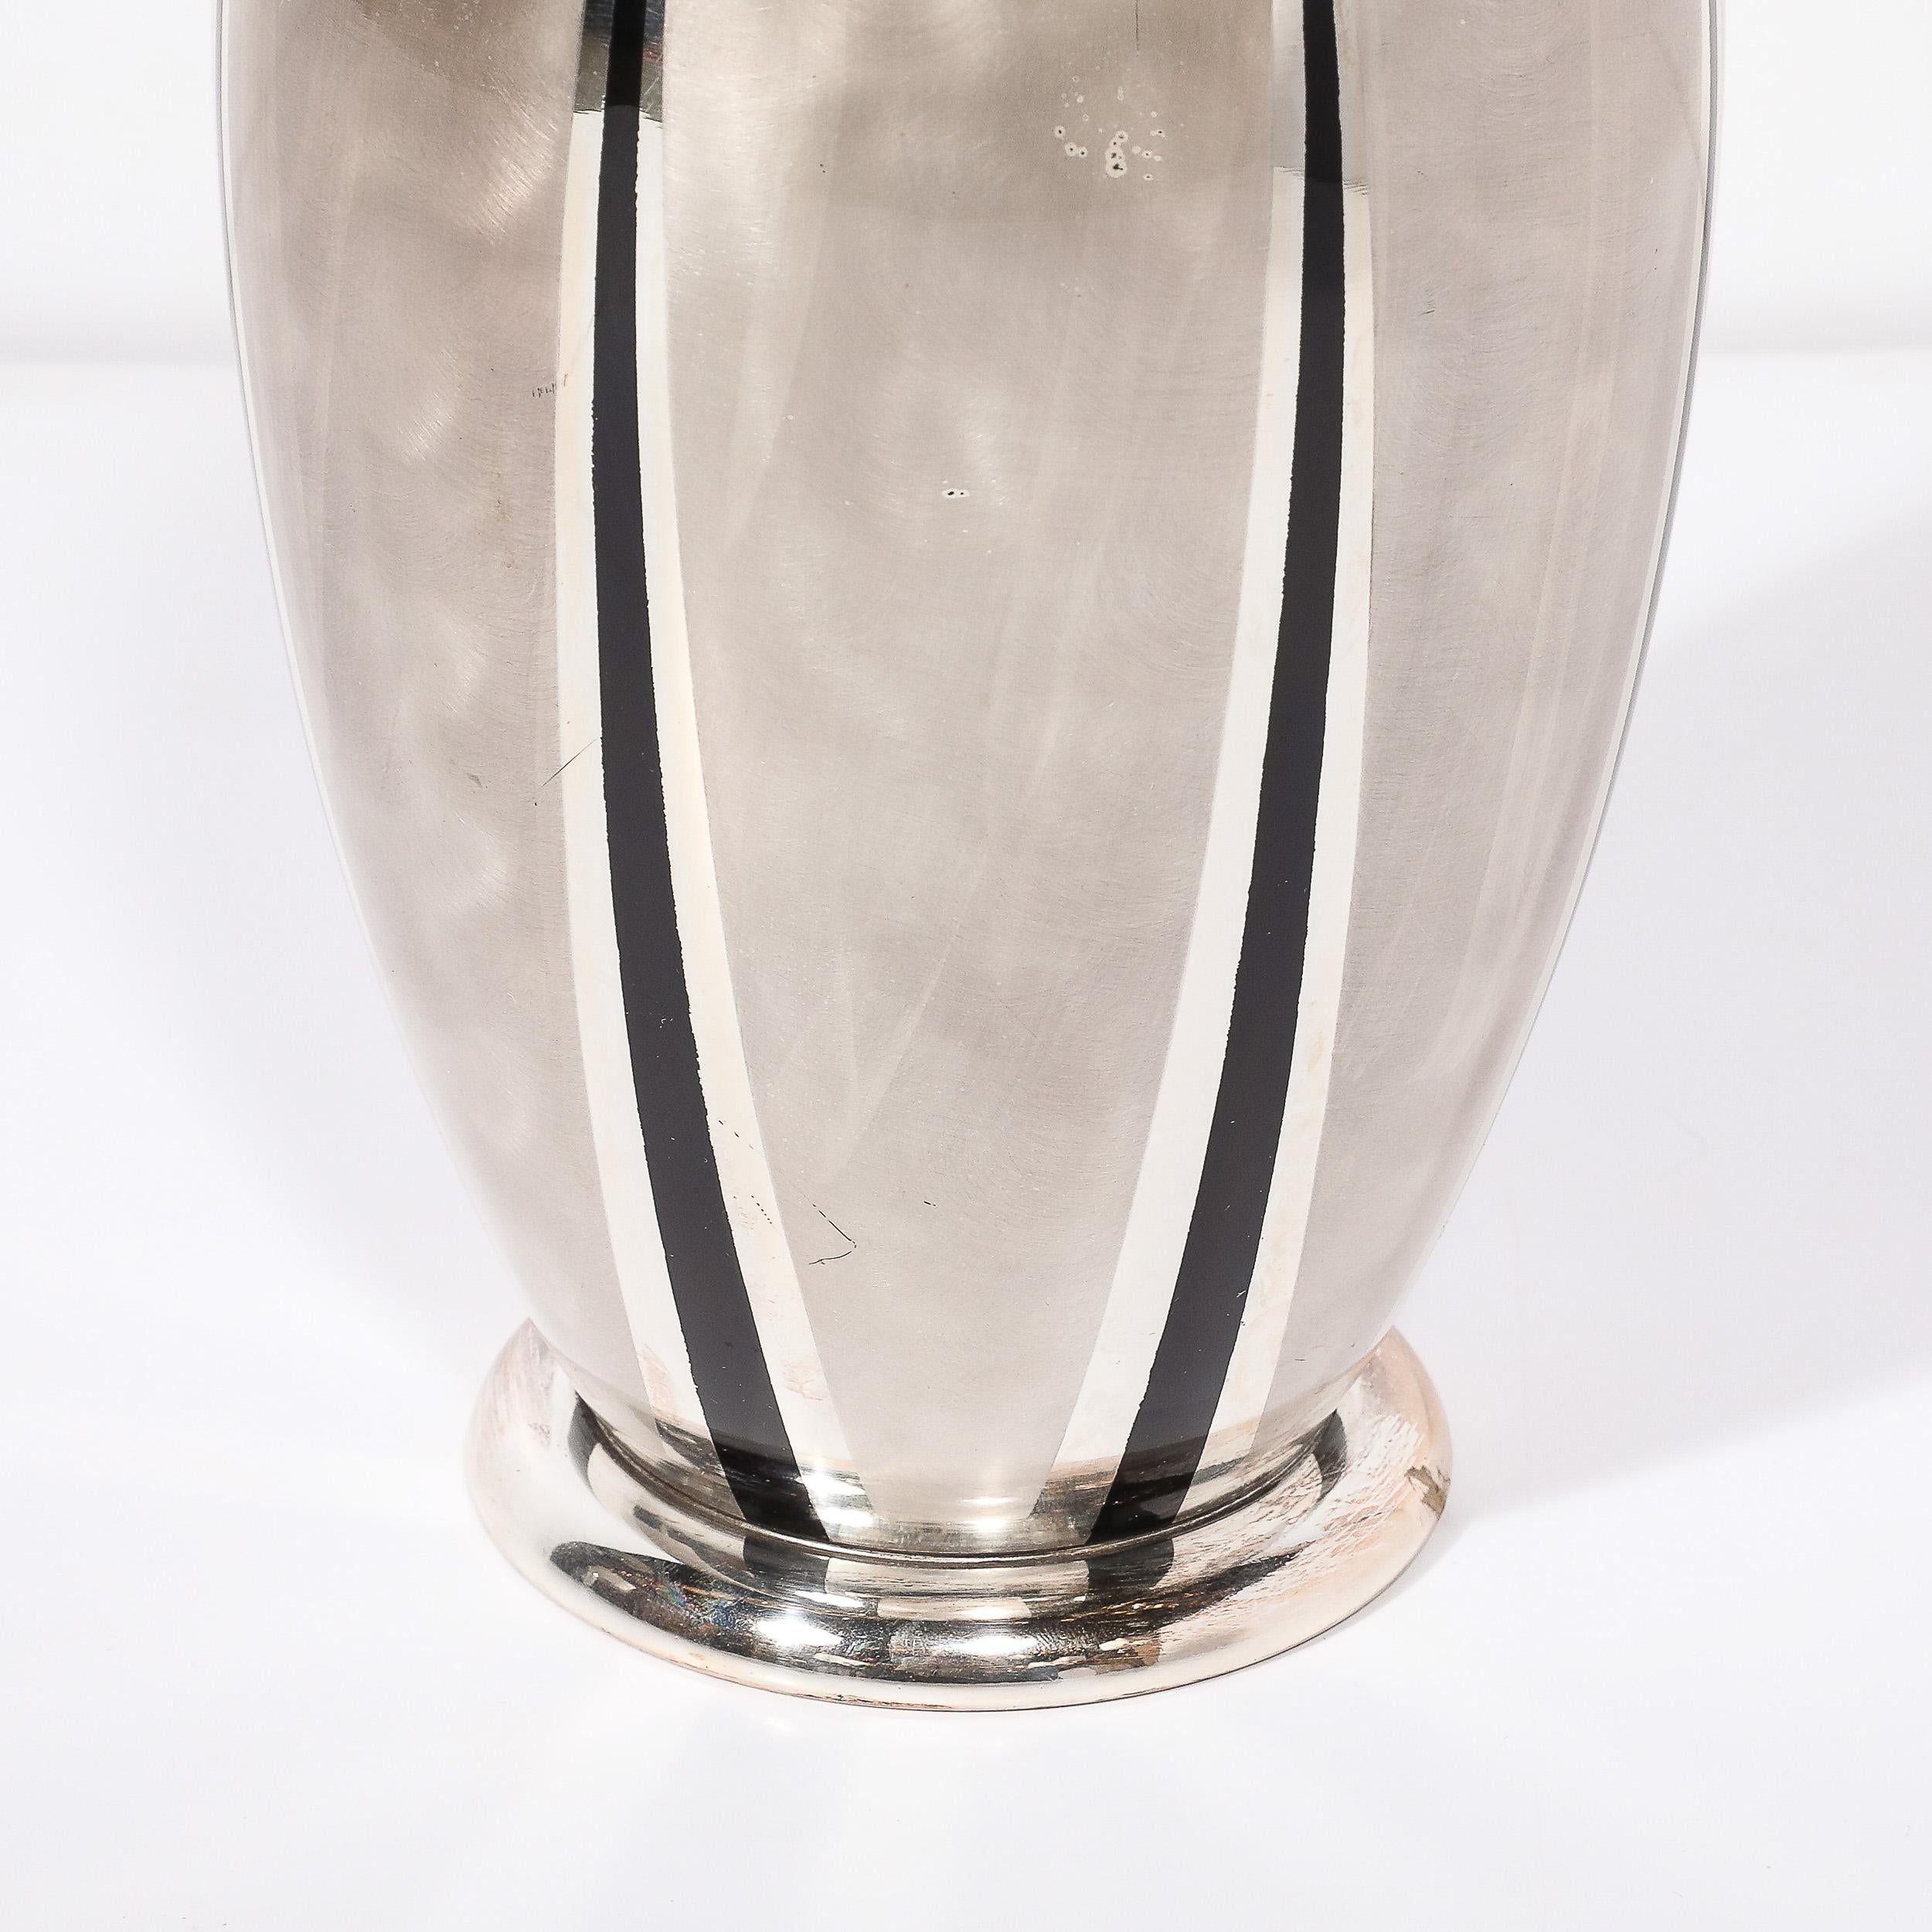 Art Deco WMF Ikora Textural Silver Plated Vase W/ Jet Black Linear Detailing In Excellent Condition For Sale In New York, NY